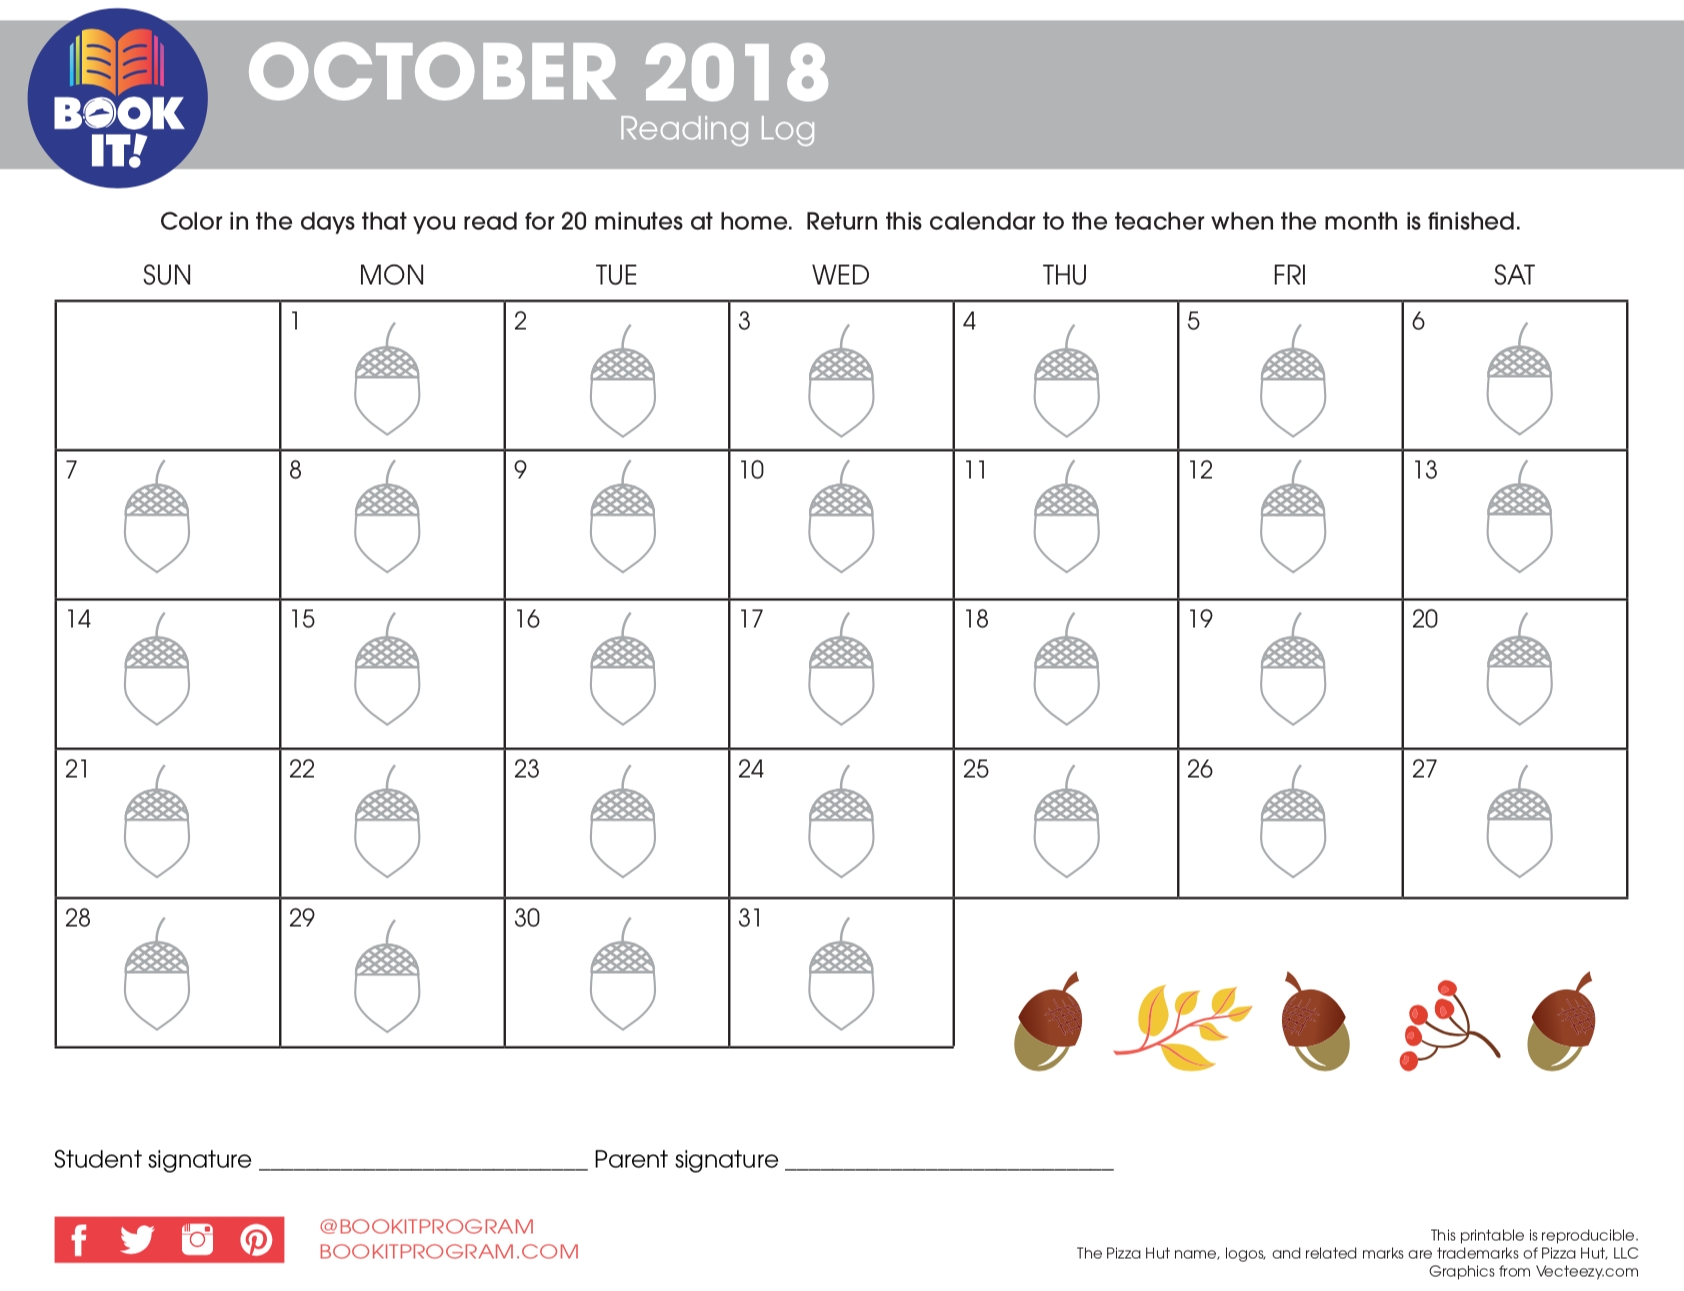 All Months-Seasonal Tracking Calendar | The Pizza Hut Book It! Program  30 Day Calendar With Circle With A Line Thru It